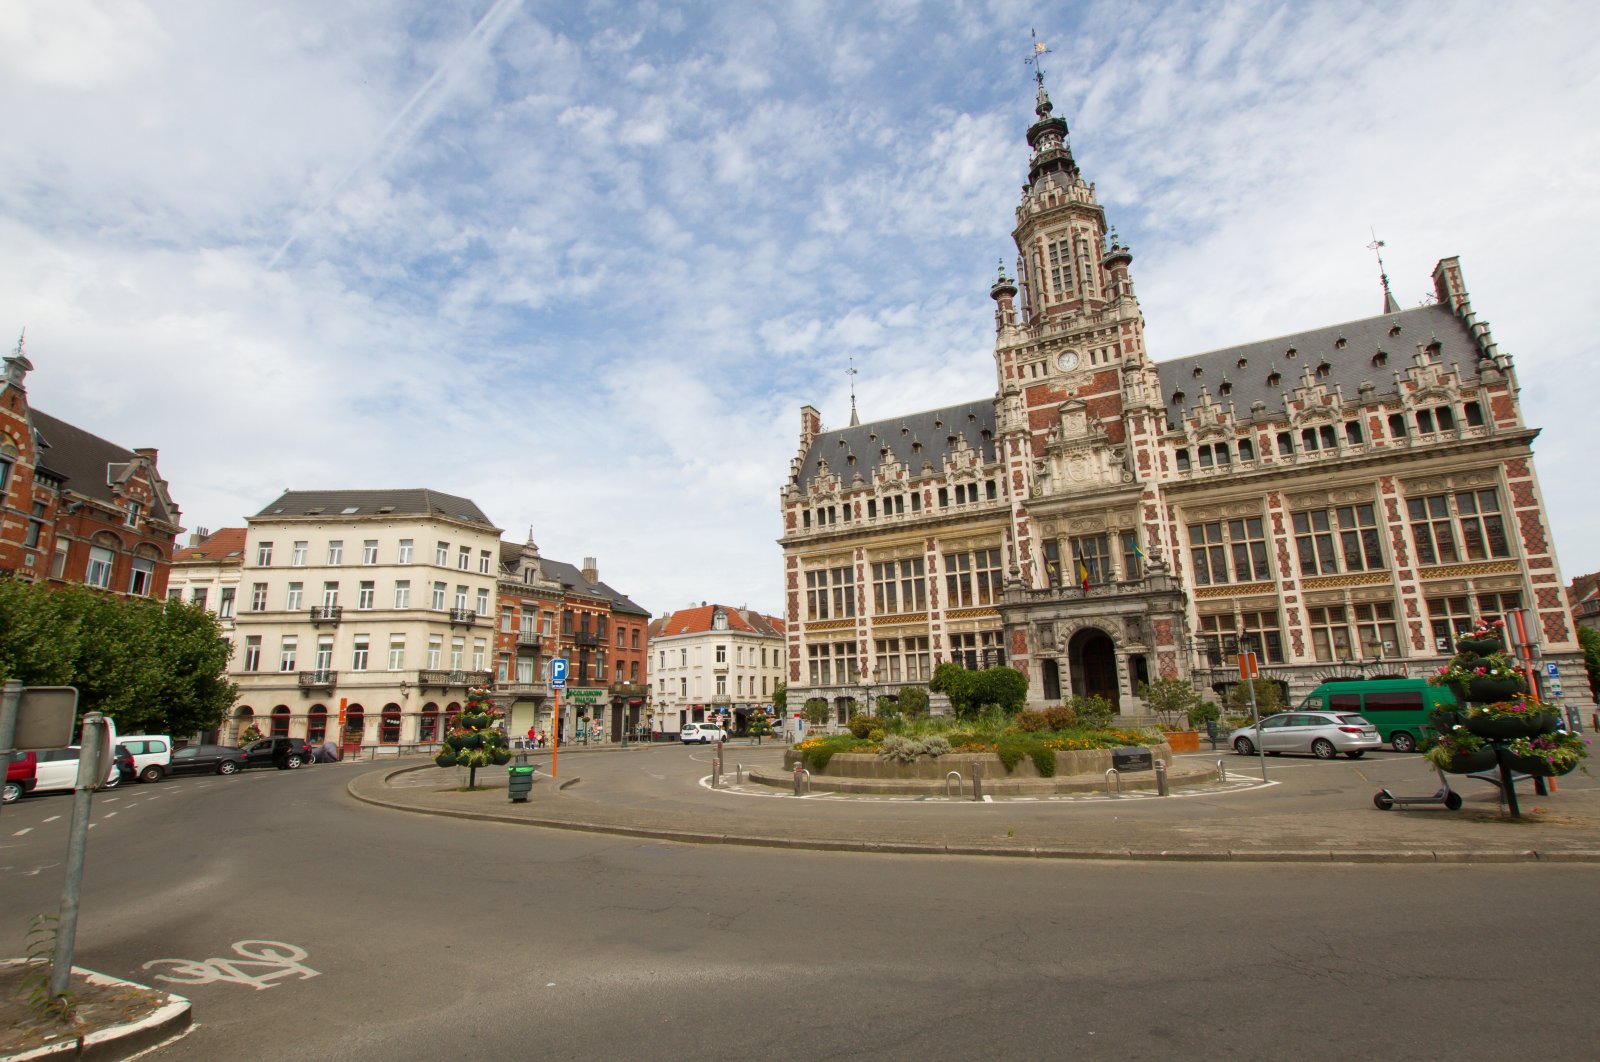 Schaarbeek city hall in the city center of Brussels, July 30, 2022. (Shutterstock File Photo